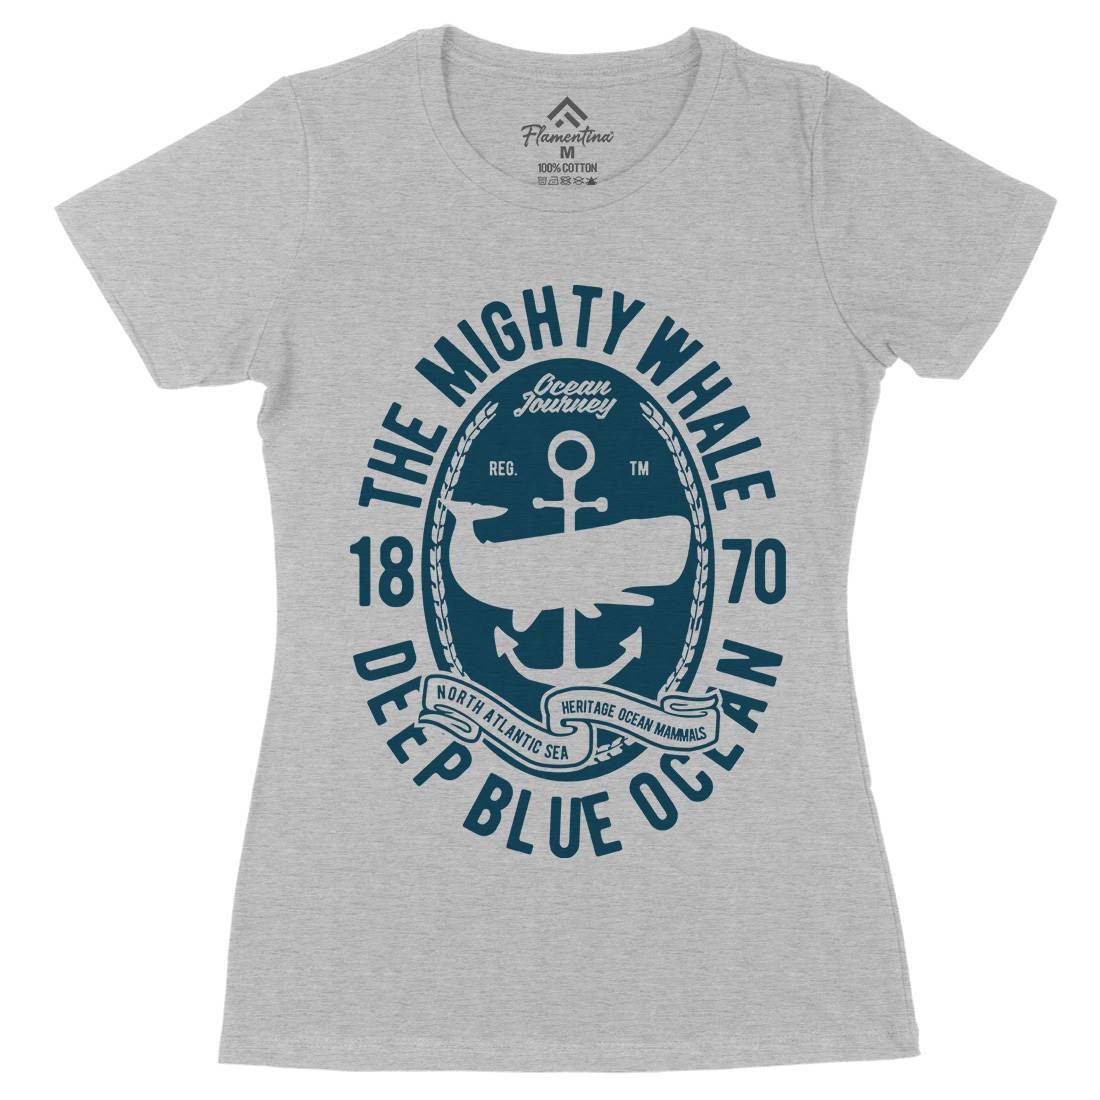 The Mighty Whale Womens Organic Crew Neck T-Shirt Navy B466